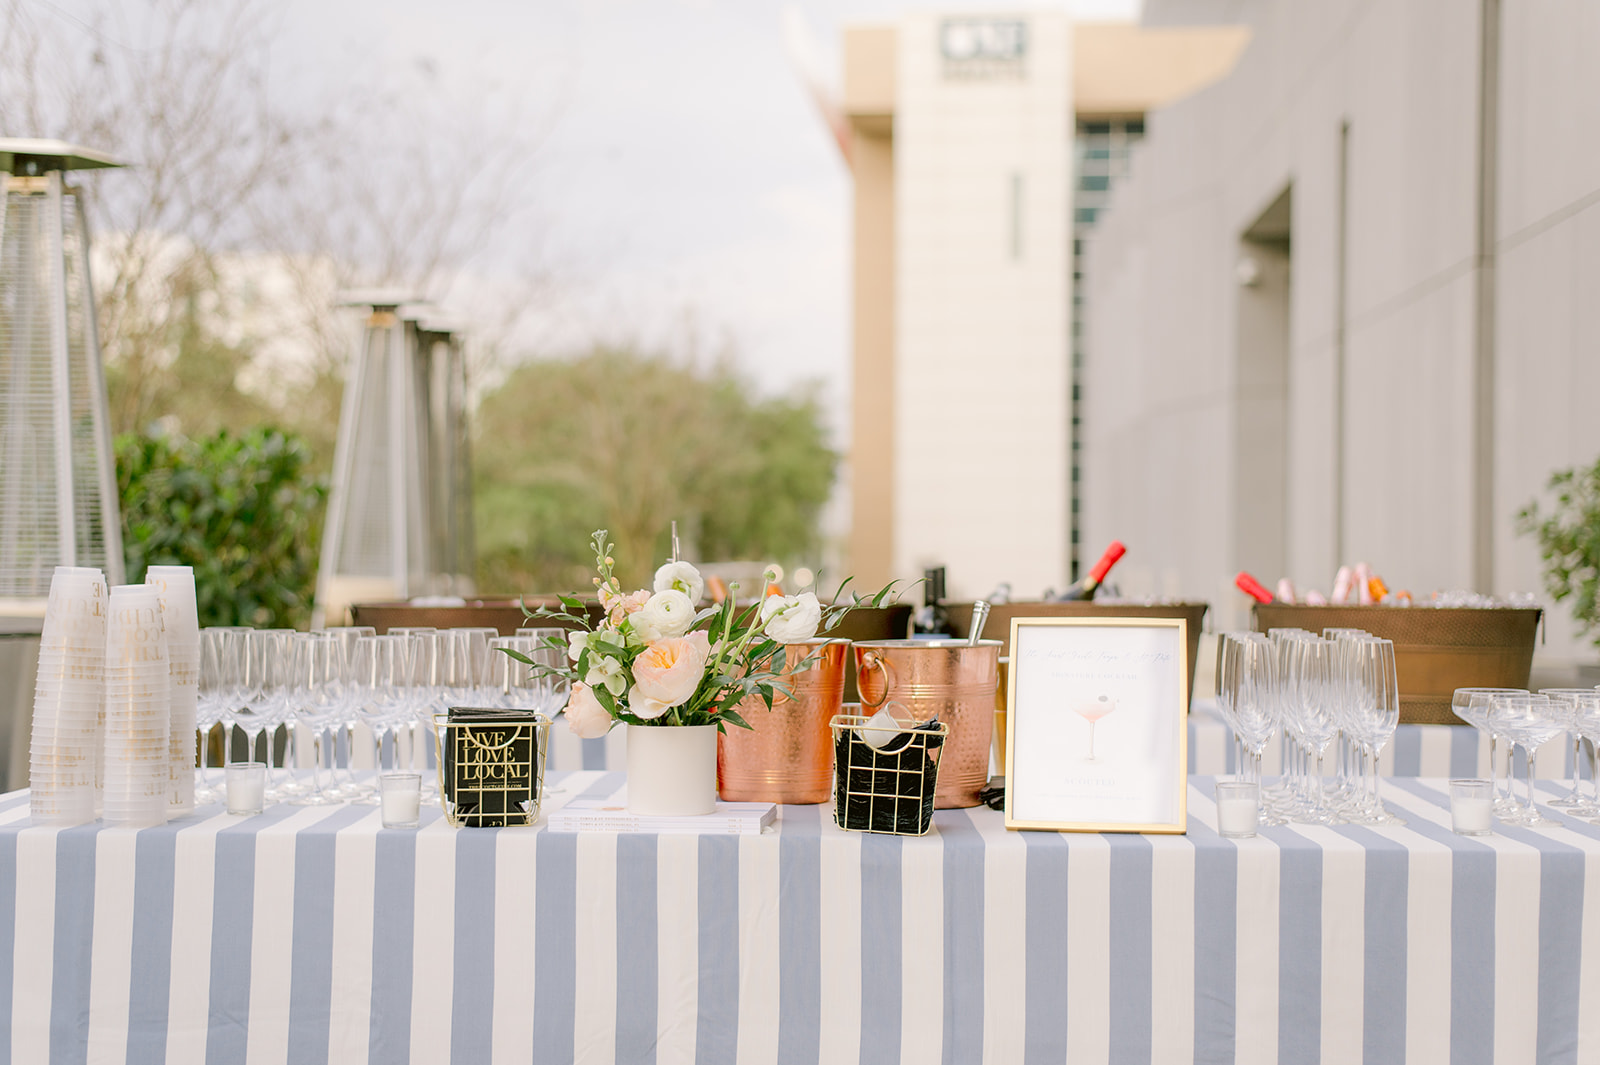 Tampa Wedding Photographer captures Oxford Creative Studio - Scout Guide Launch Event
